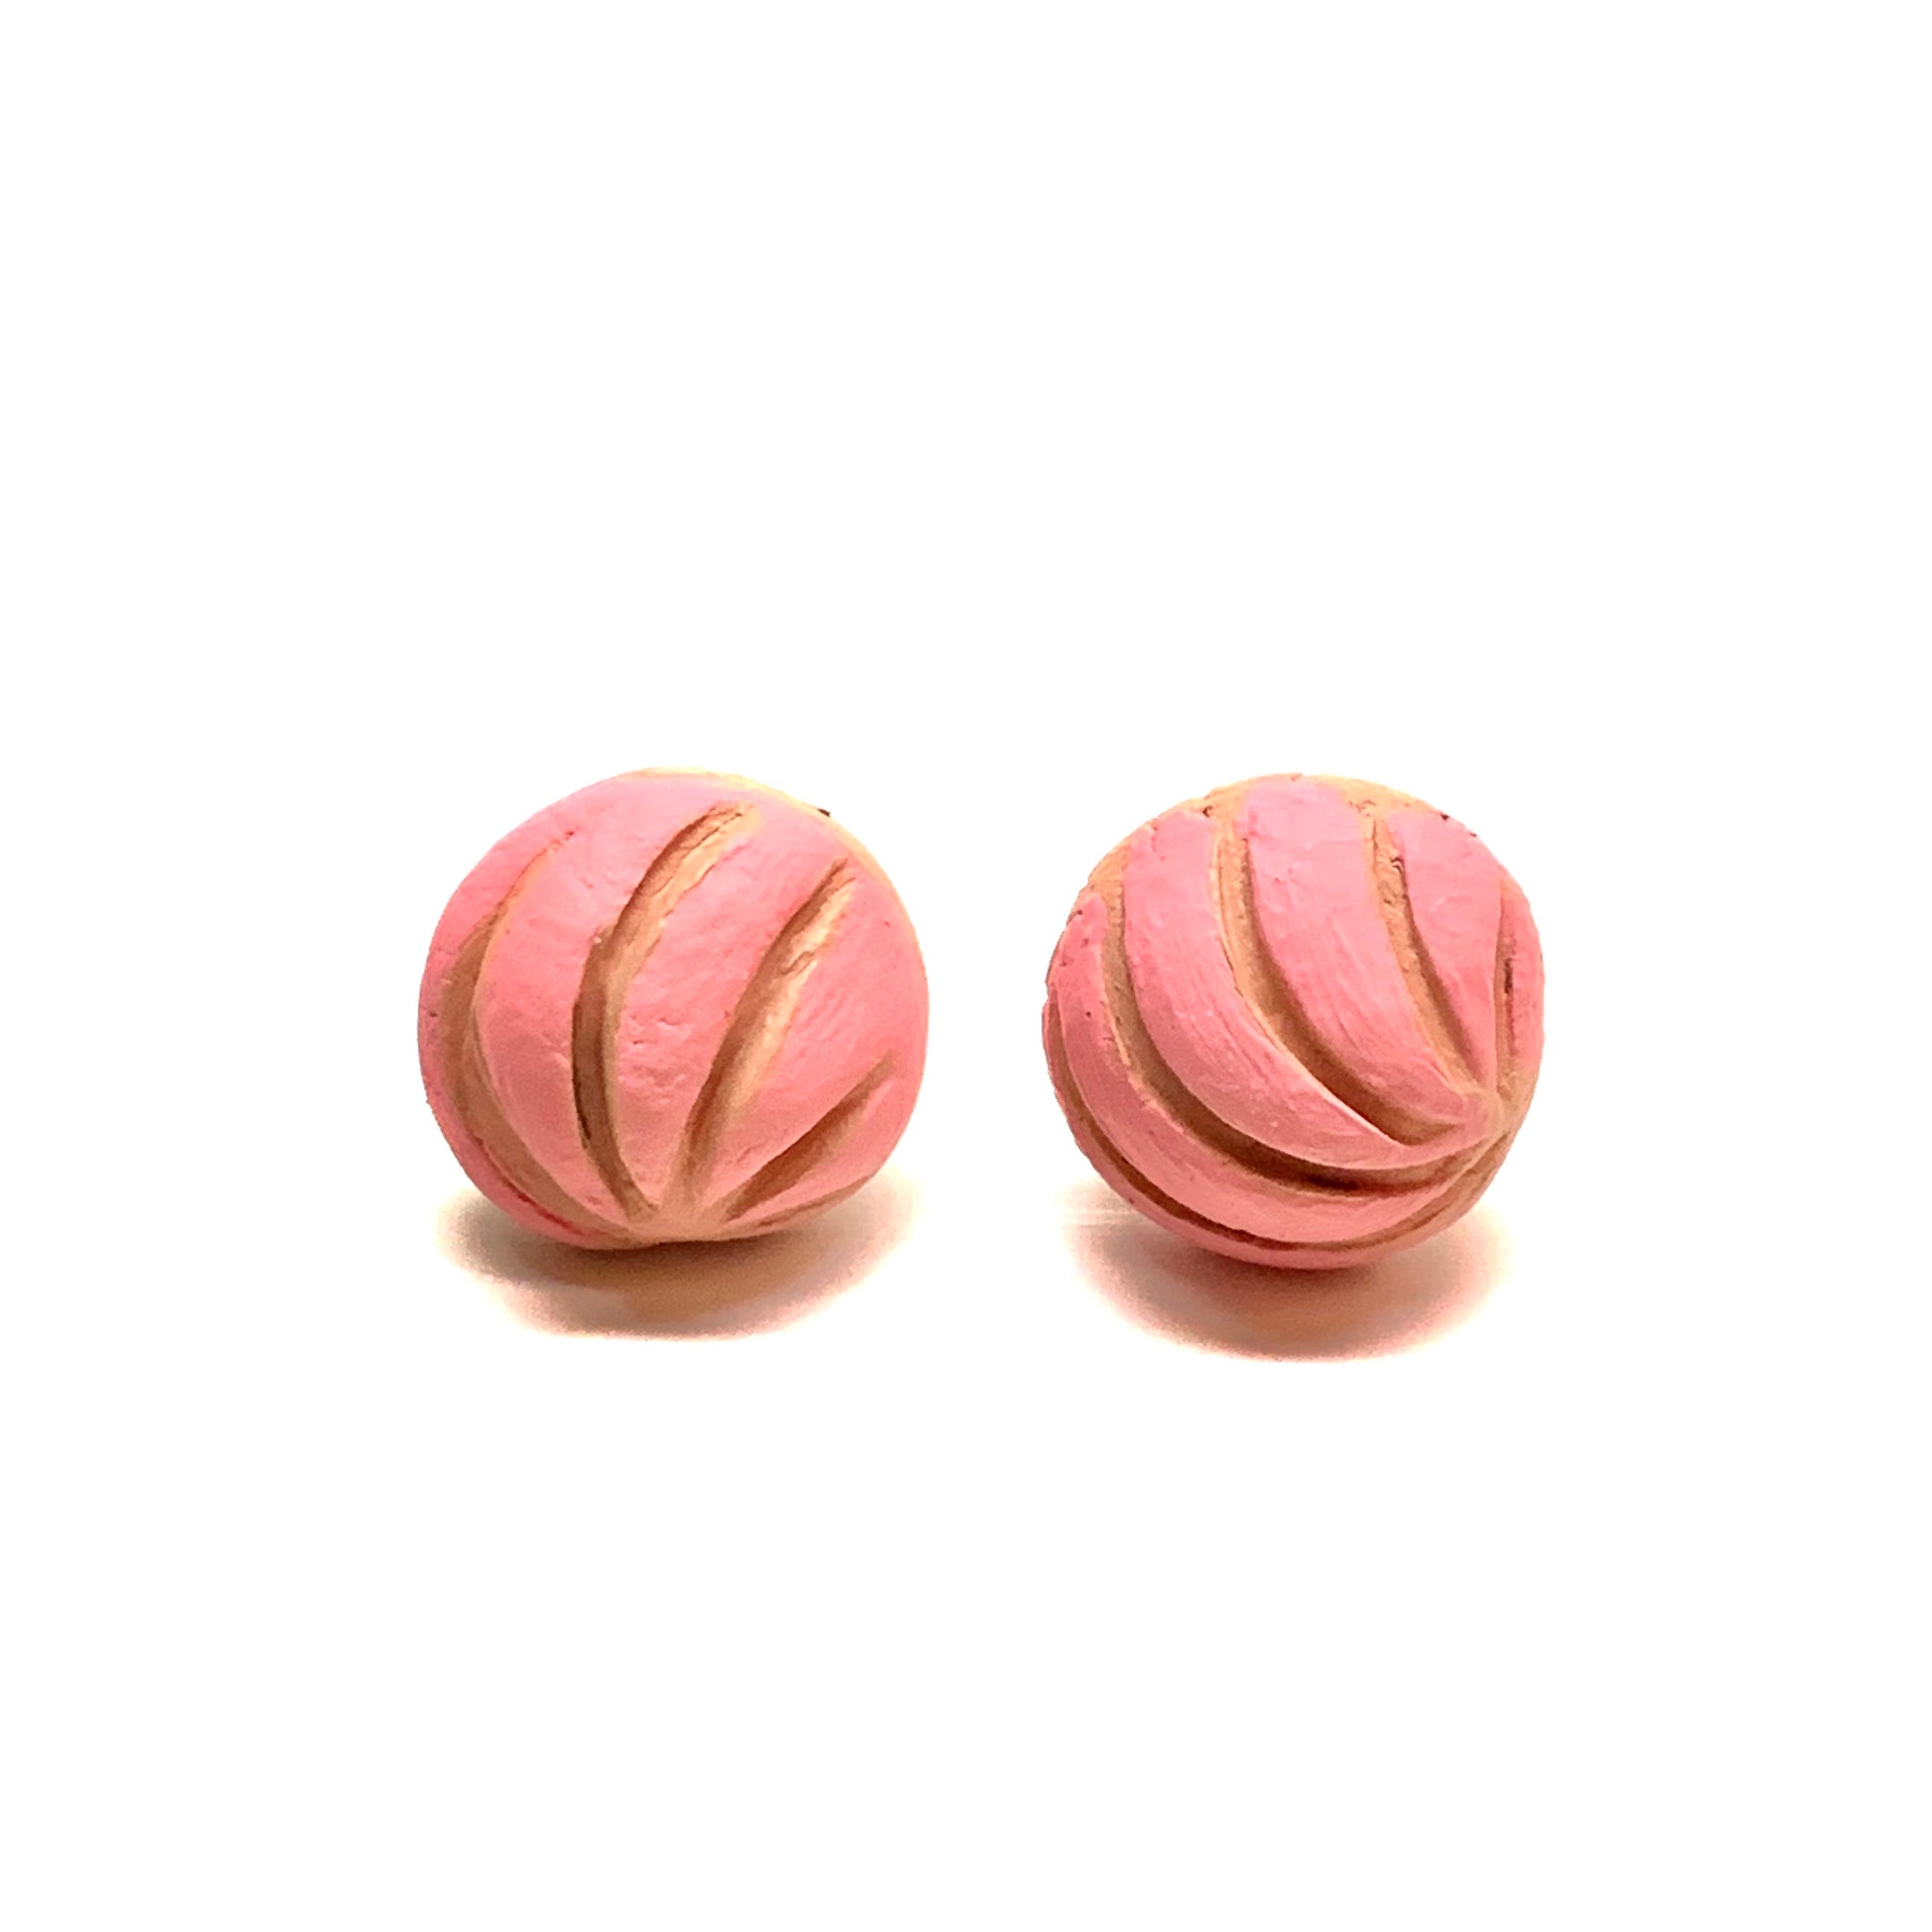 Pink concha clay stud earrings. Mexican pan dulce sweet bread food jewelry. Strayberry. Mexico folk art. Aretes para mujer hechos a mano. Handmade Frida Kahlo inspired pendants